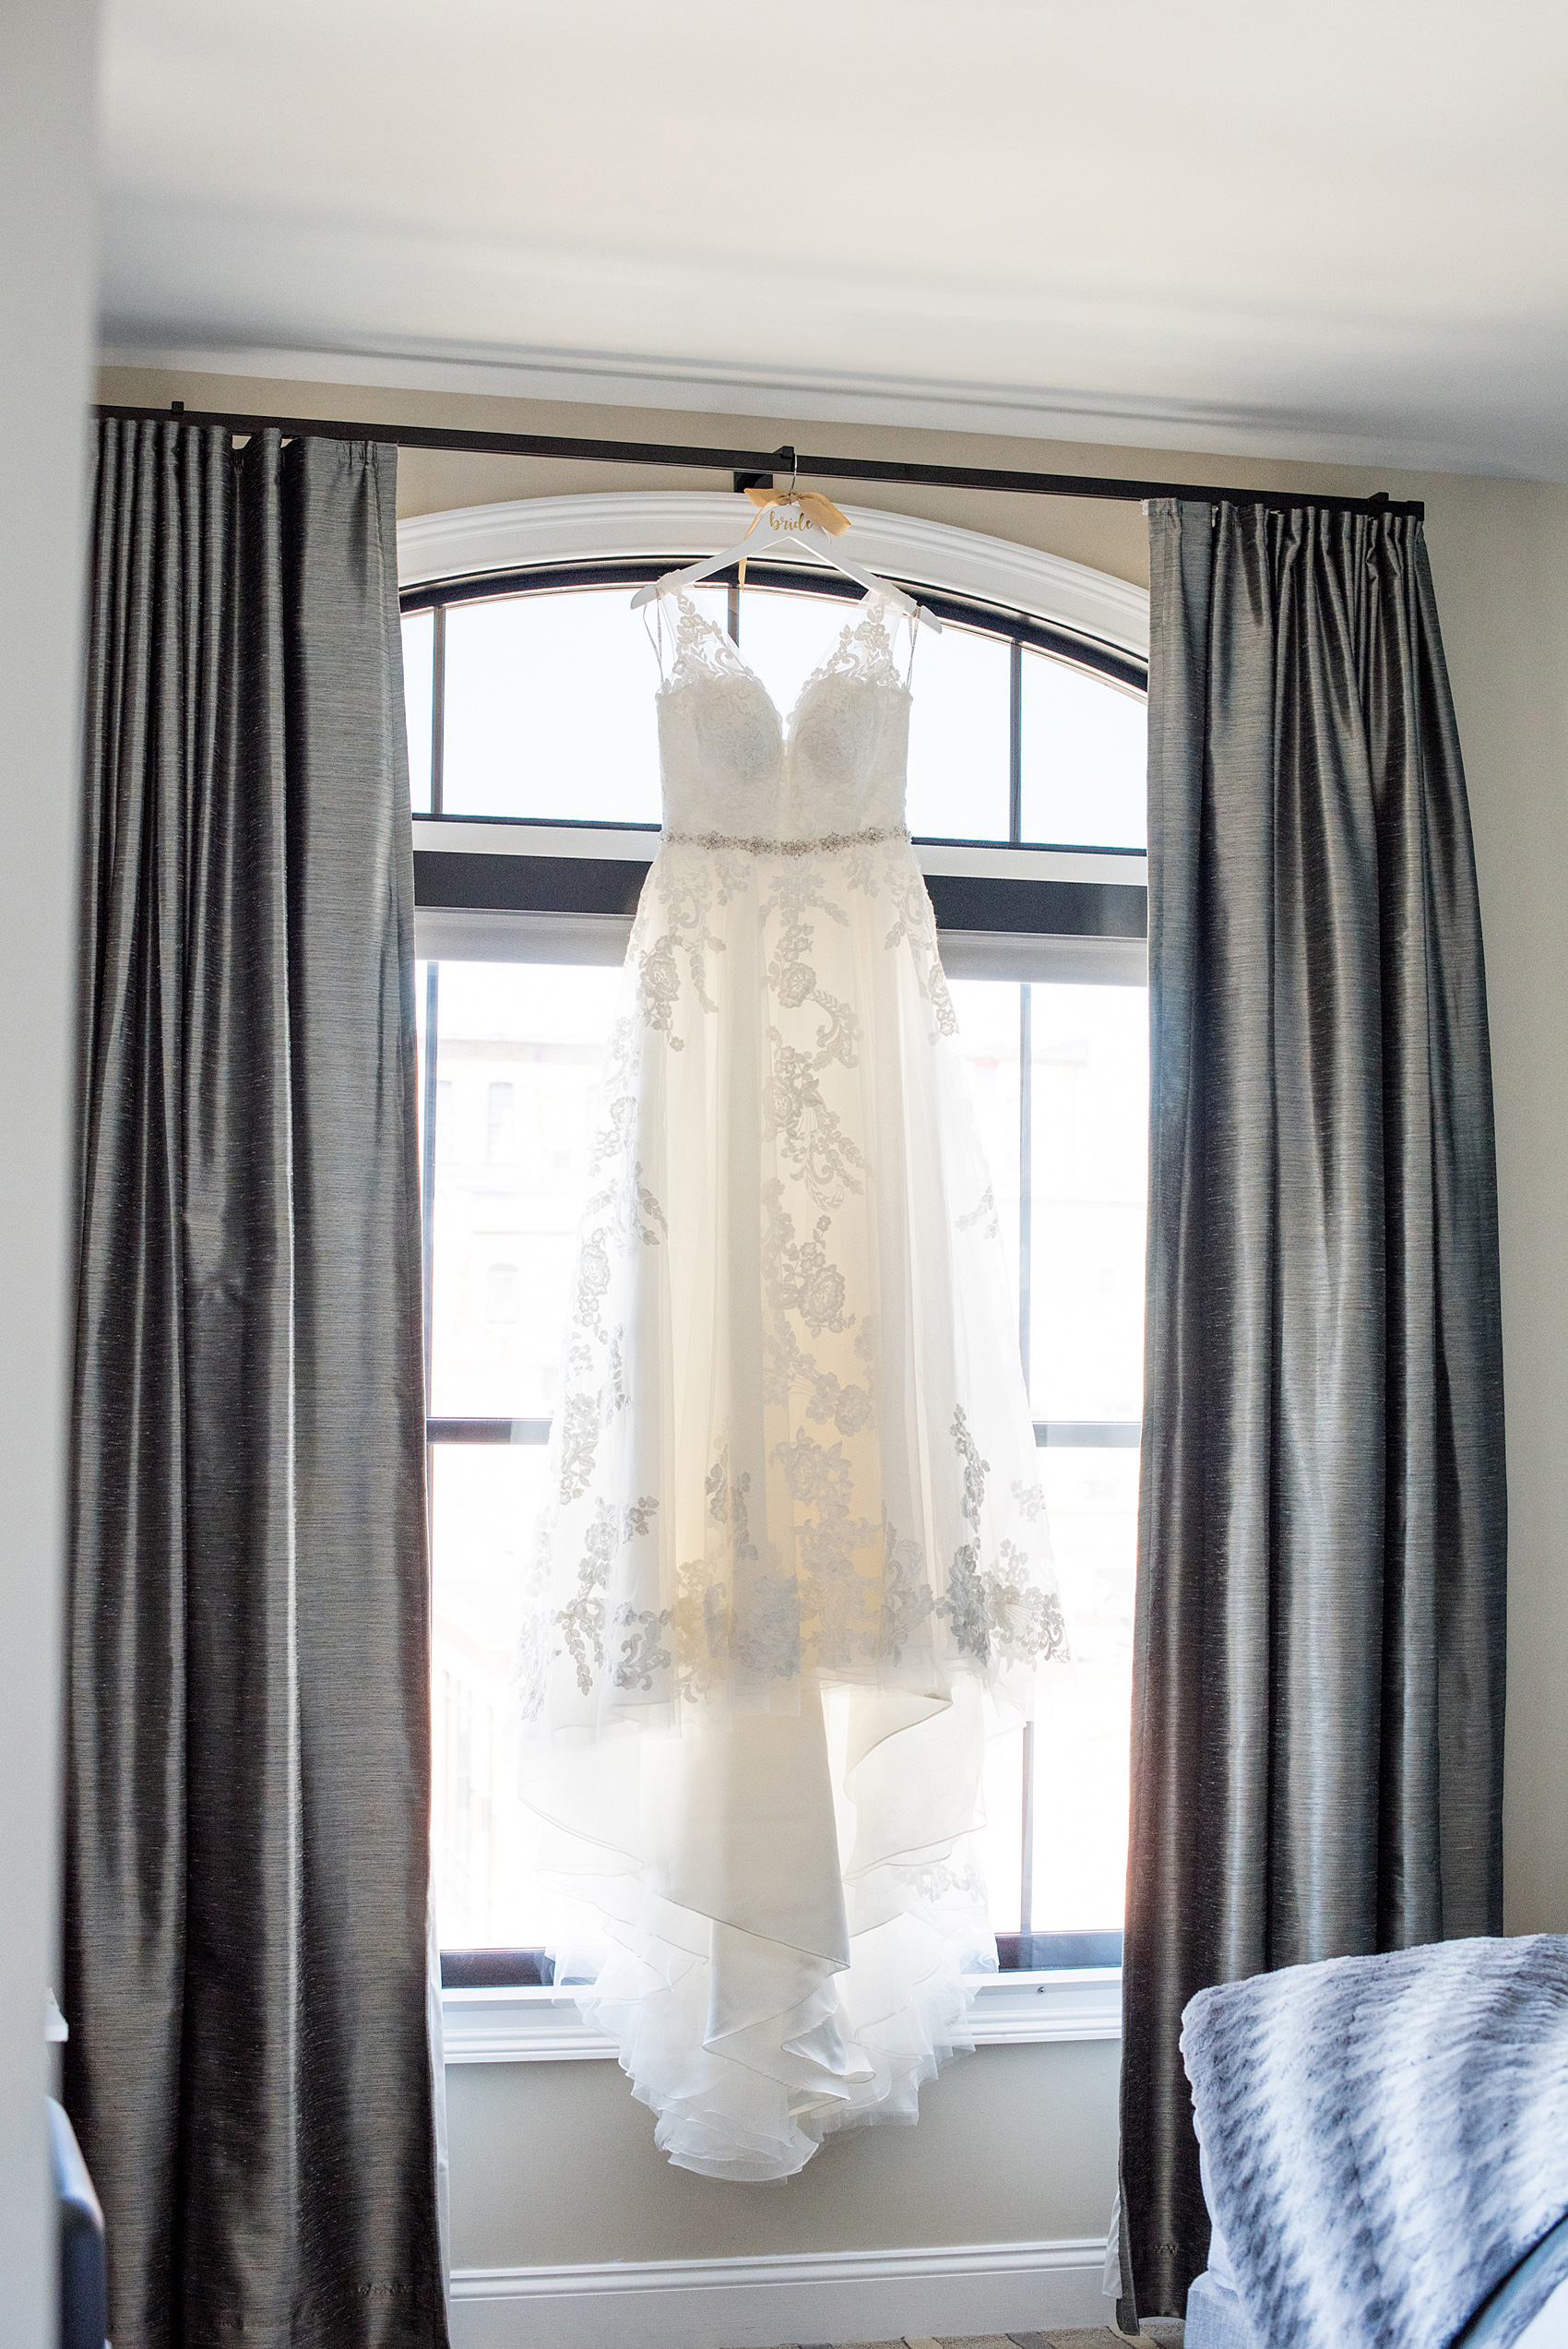 Saratoga Springs destination wedding photos by Mikkel Paige Photography. The bride got ready at the Pavilion Grand hotel and wore a lace gown. The spring reception was held at Saratoga National Golf Club venue. #SaratogaSpringsNY #SaratogaSprings #mikkelpaige #NYwedding #destinationwedding 